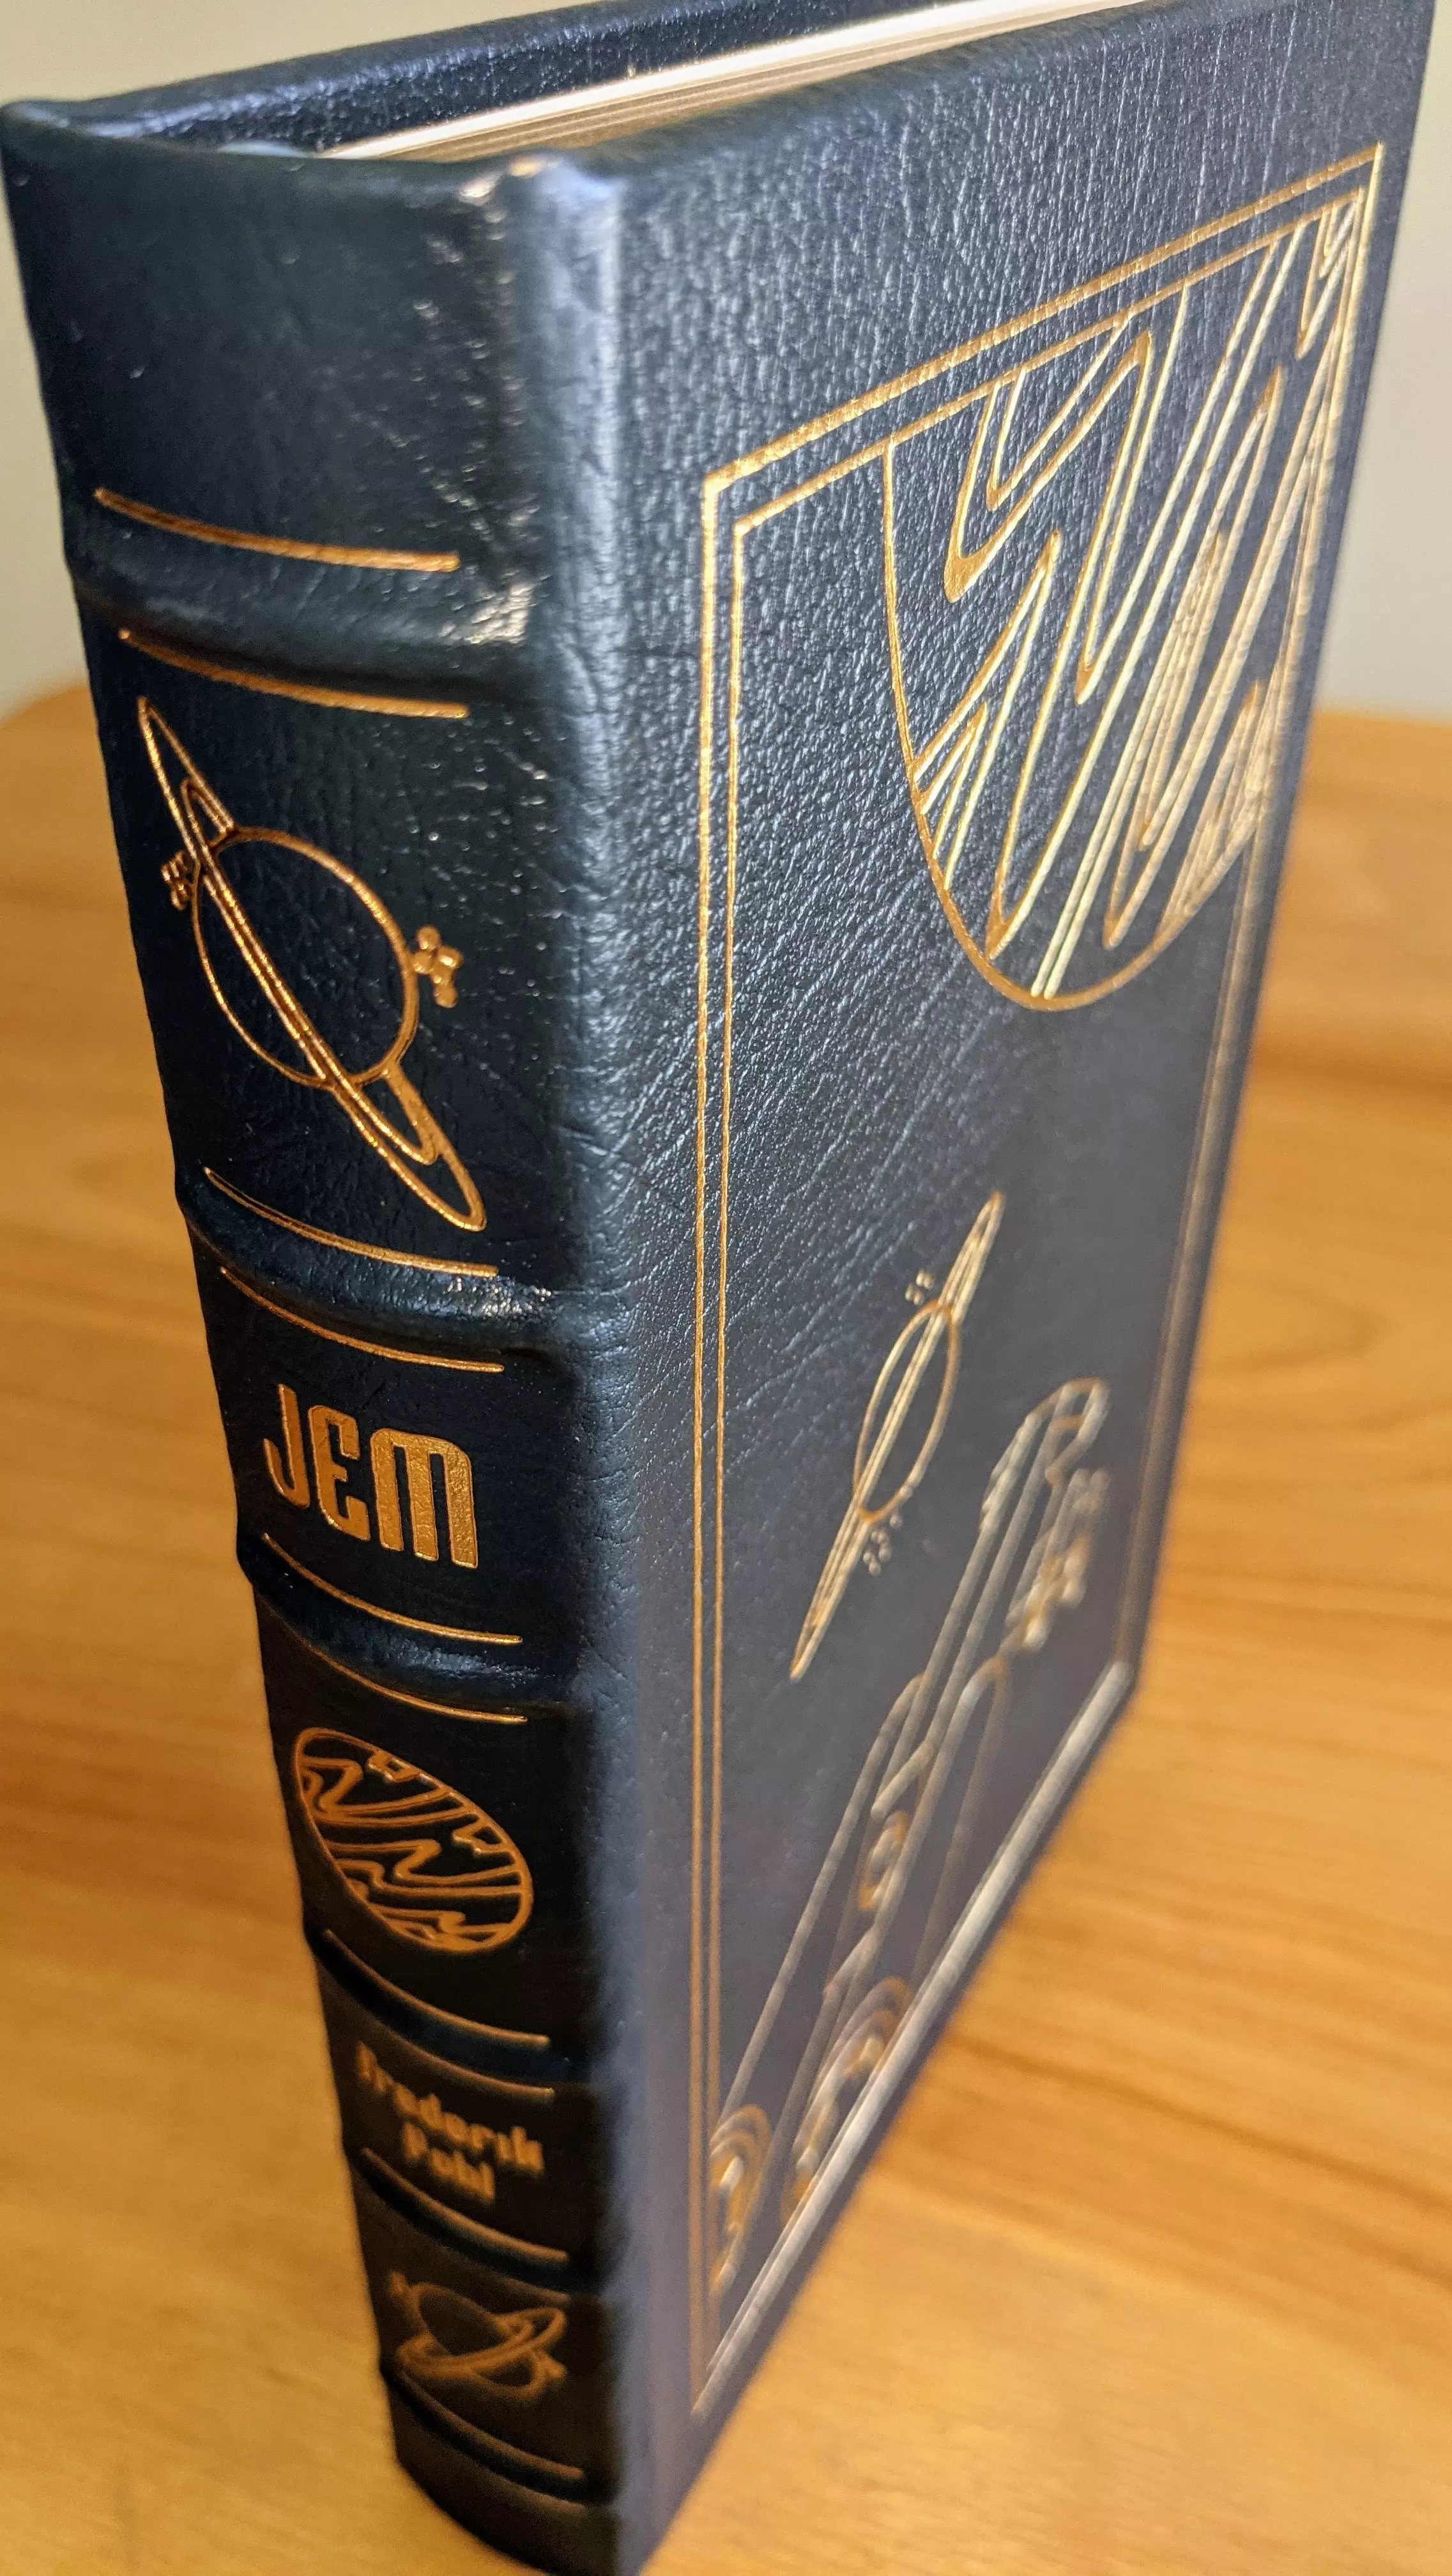 Stunning Grey Leather Bound hardback book with hubbed spine, cover artwork in 22kt gold, printed on archival paper with gold gilded edges, smyth sewing & concealed muslin joints
	  - original artwork by Vincent Di Fate